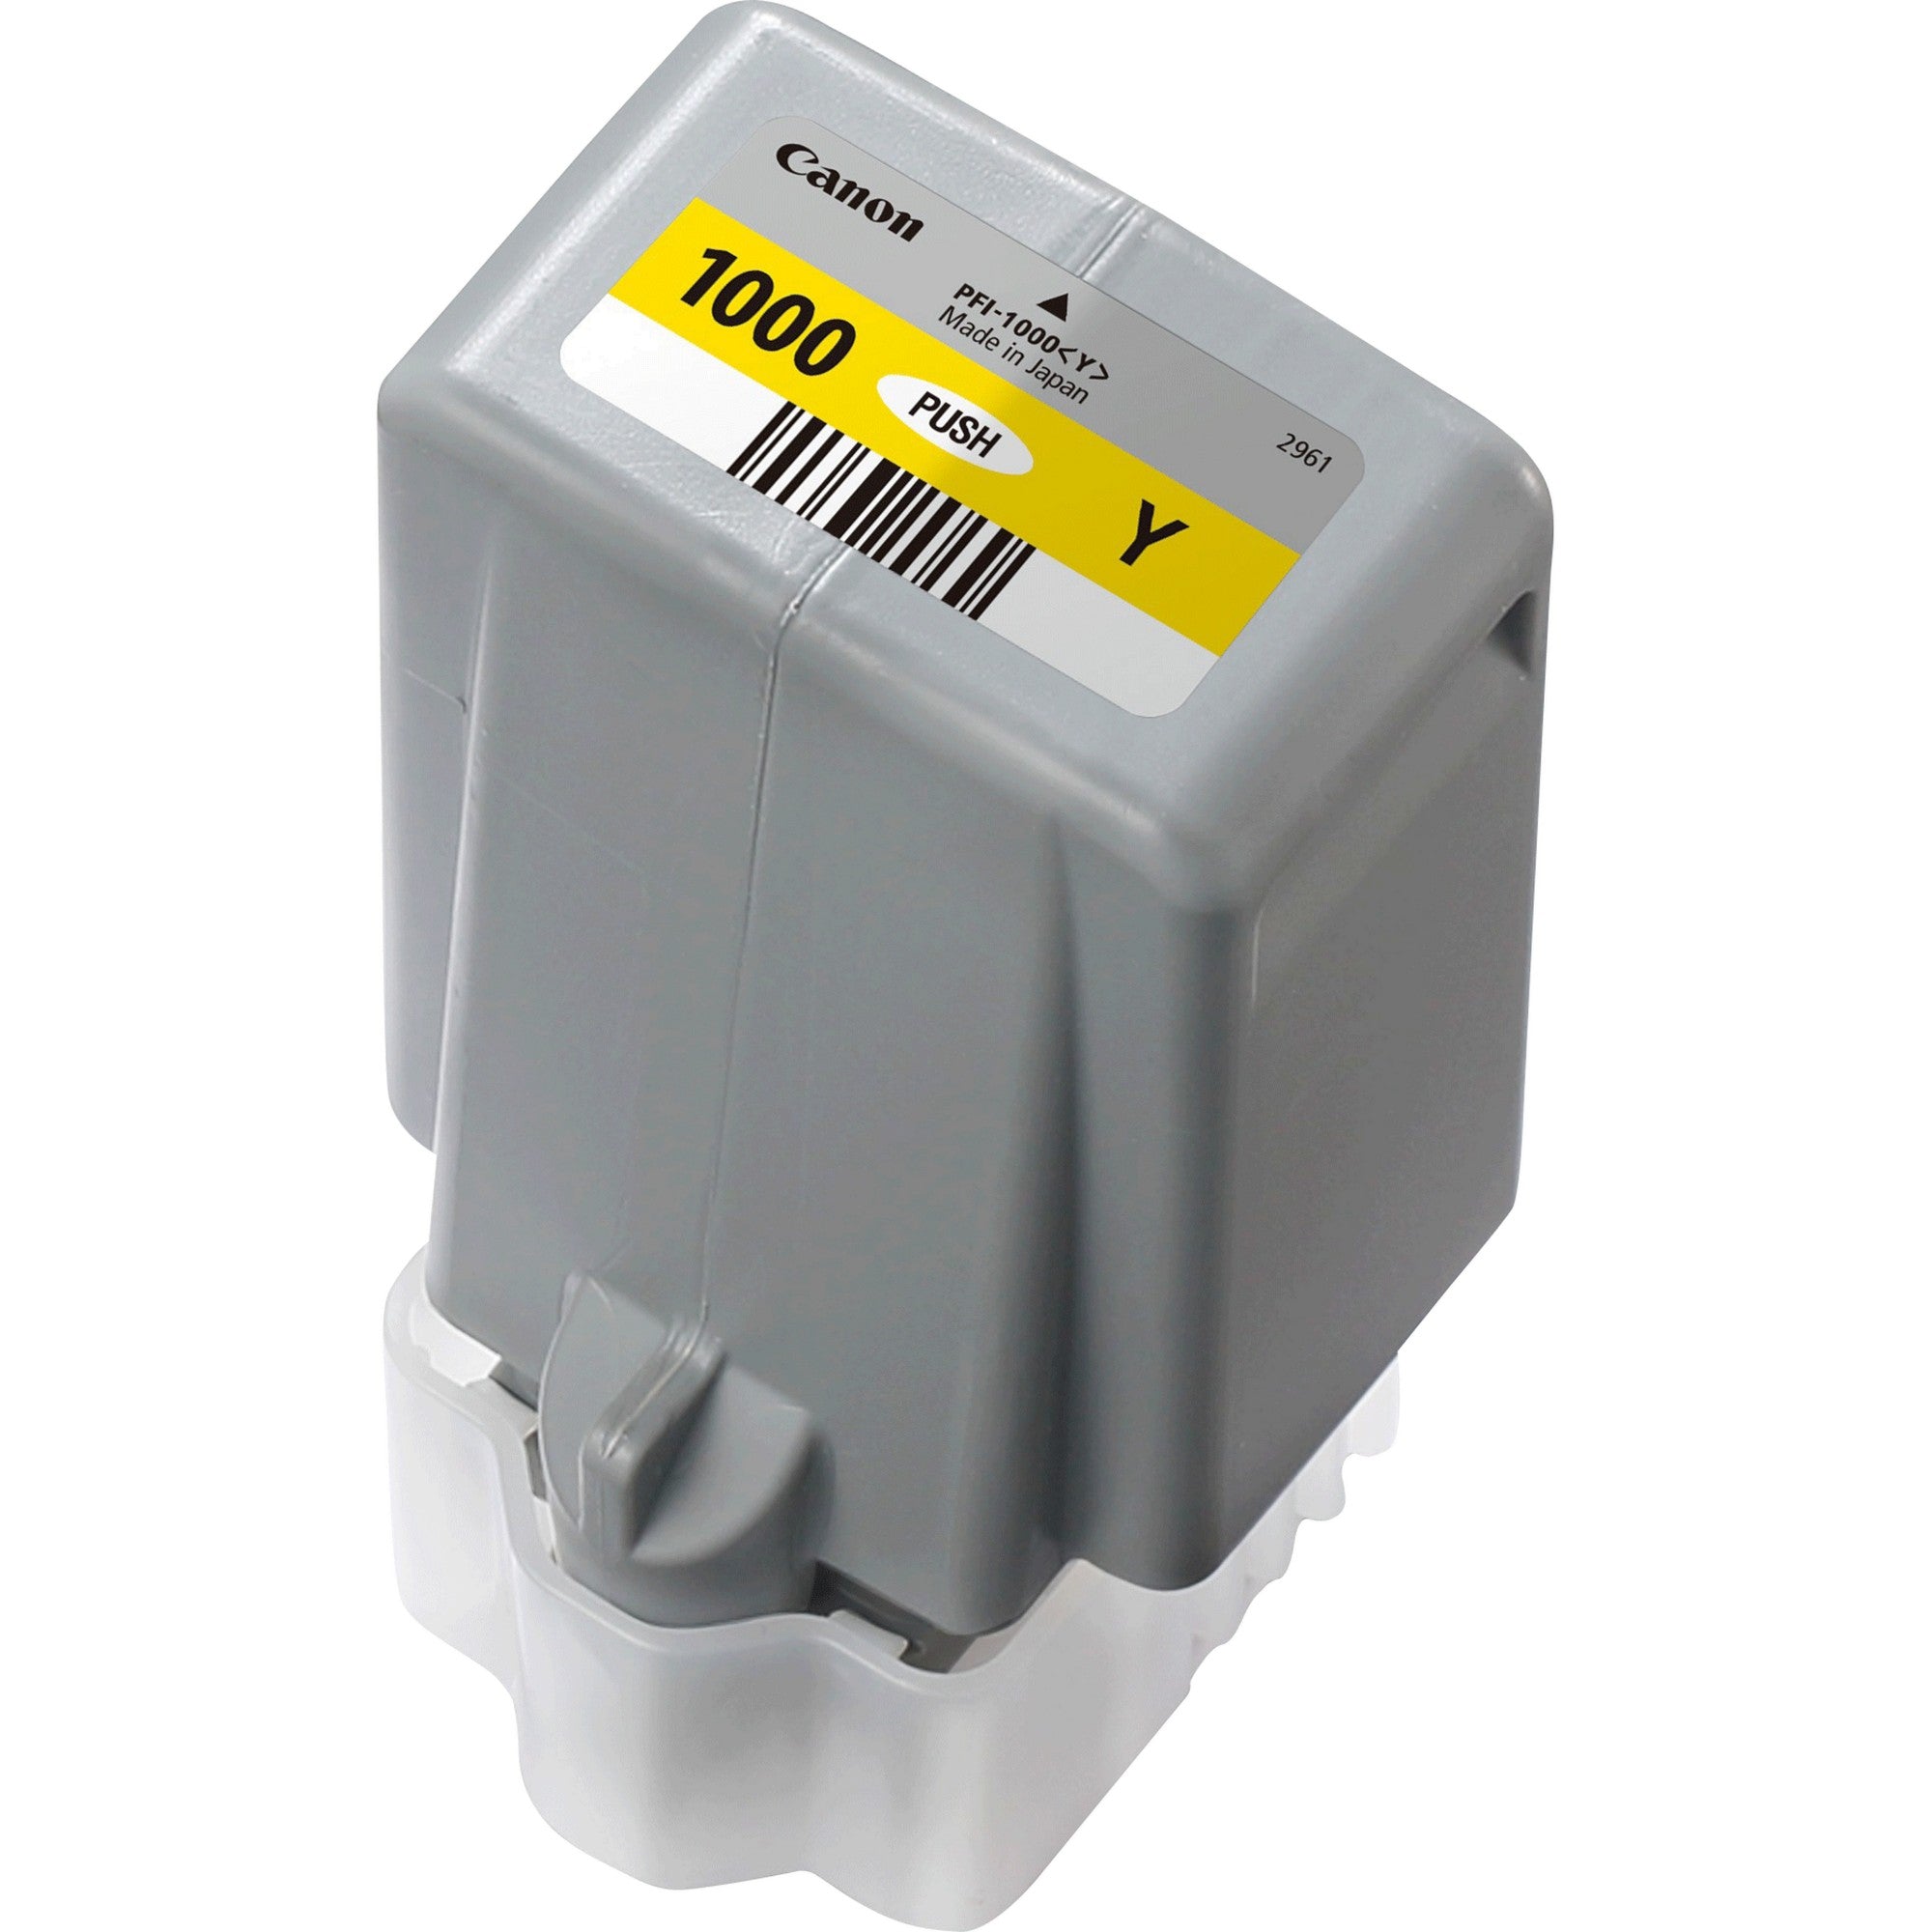 Canon 0549C001/PFI-1000Y Ink cartridge yellow, 3.37K pages 80ml for Canon Pro 1000